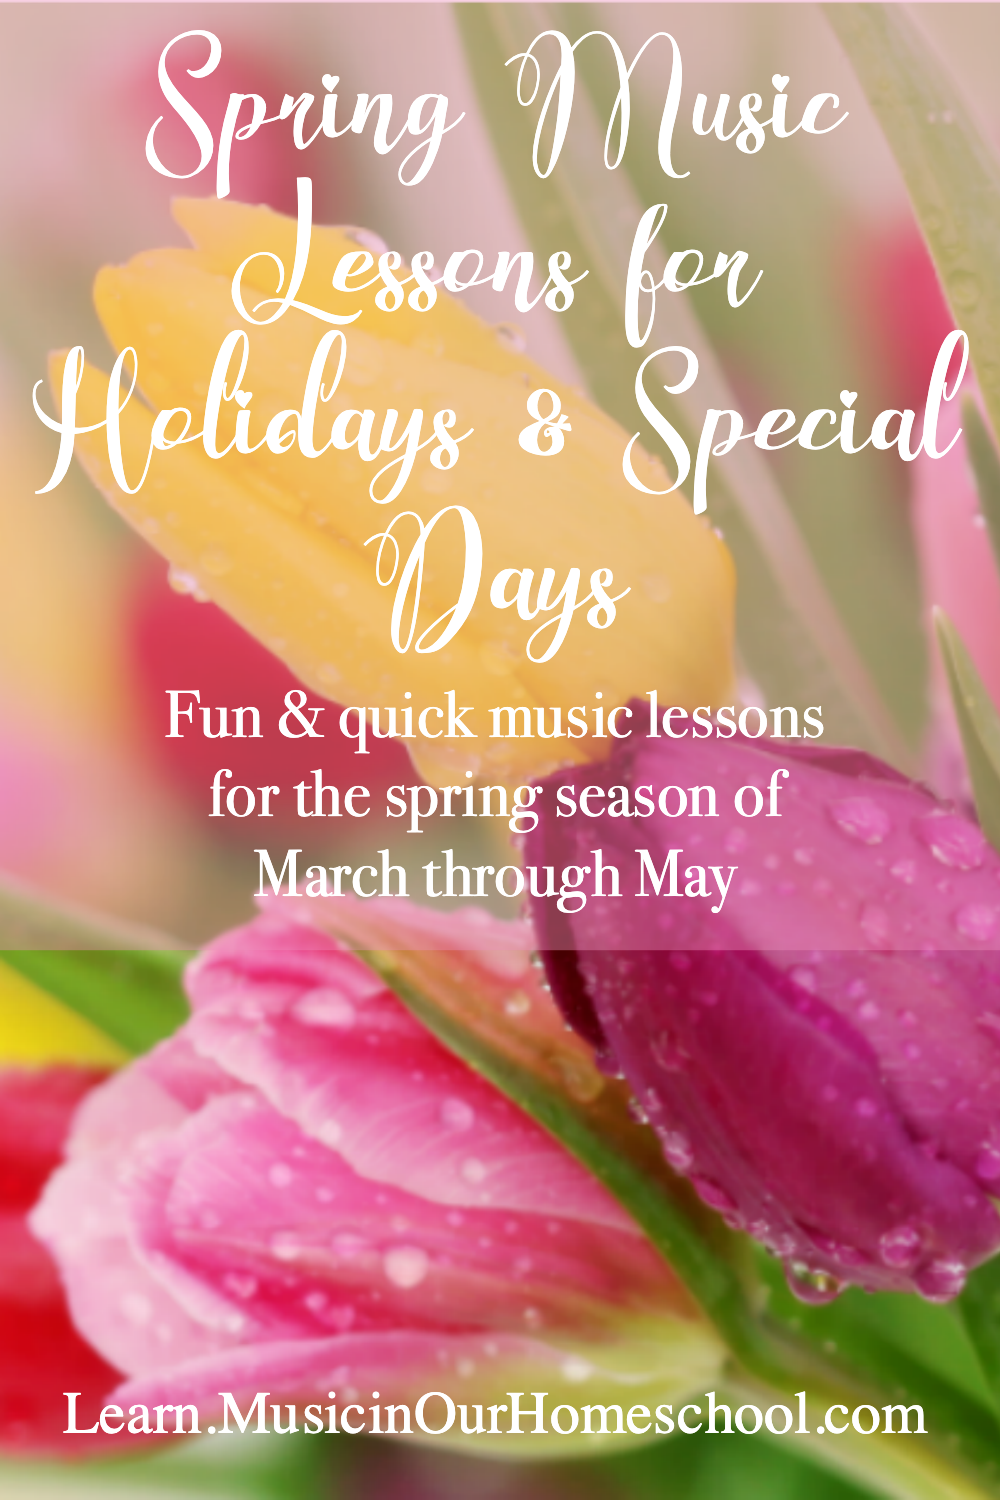 Spring Music Lessons for Holidays and Special Days from Music in Our Homeschool